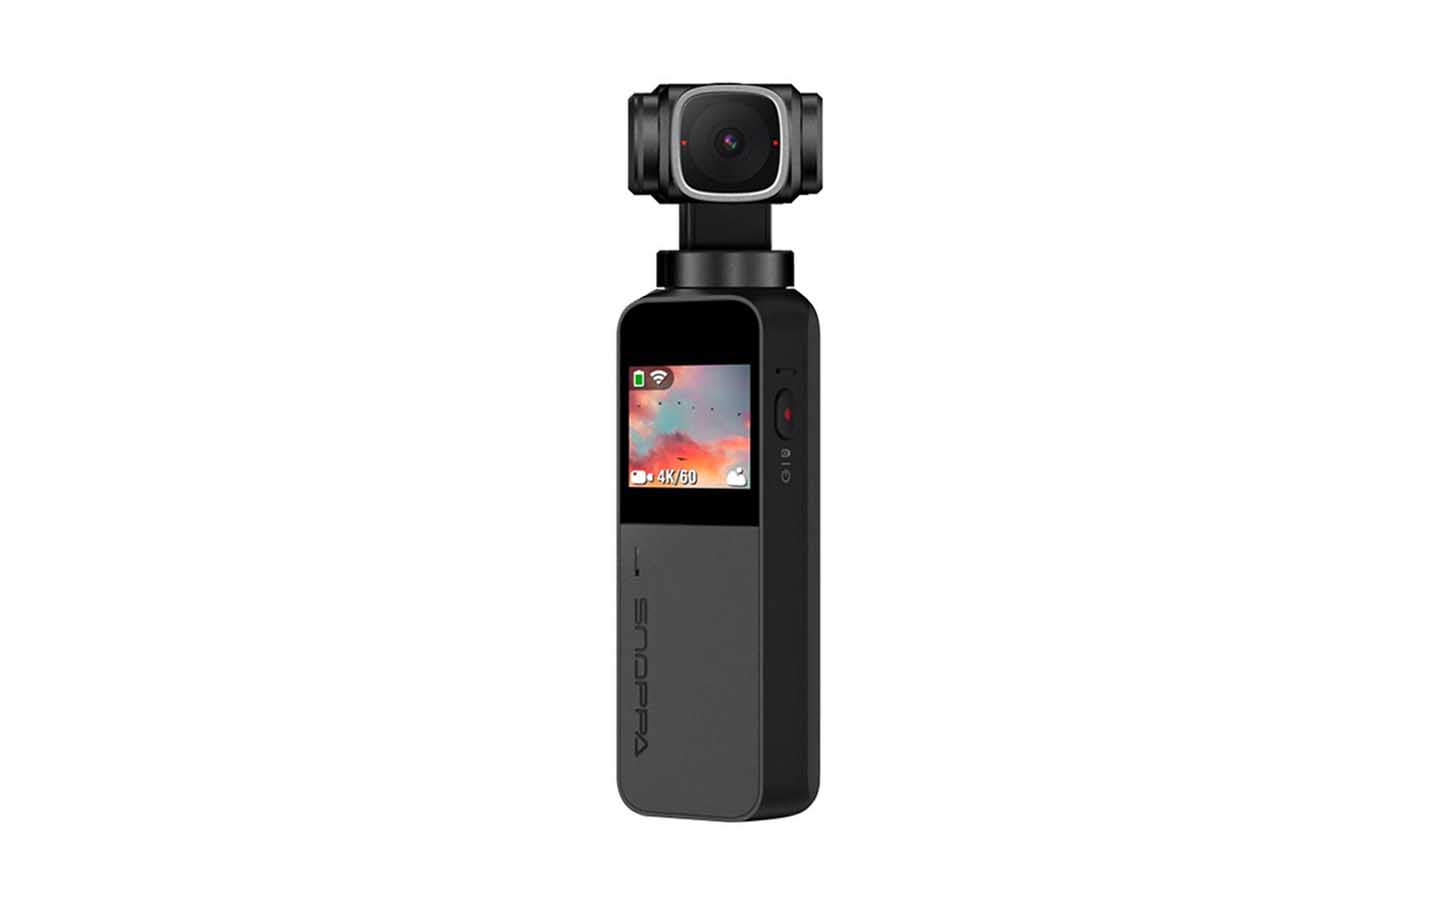 Snoppa Vmate 3-axis gimbal camera now available